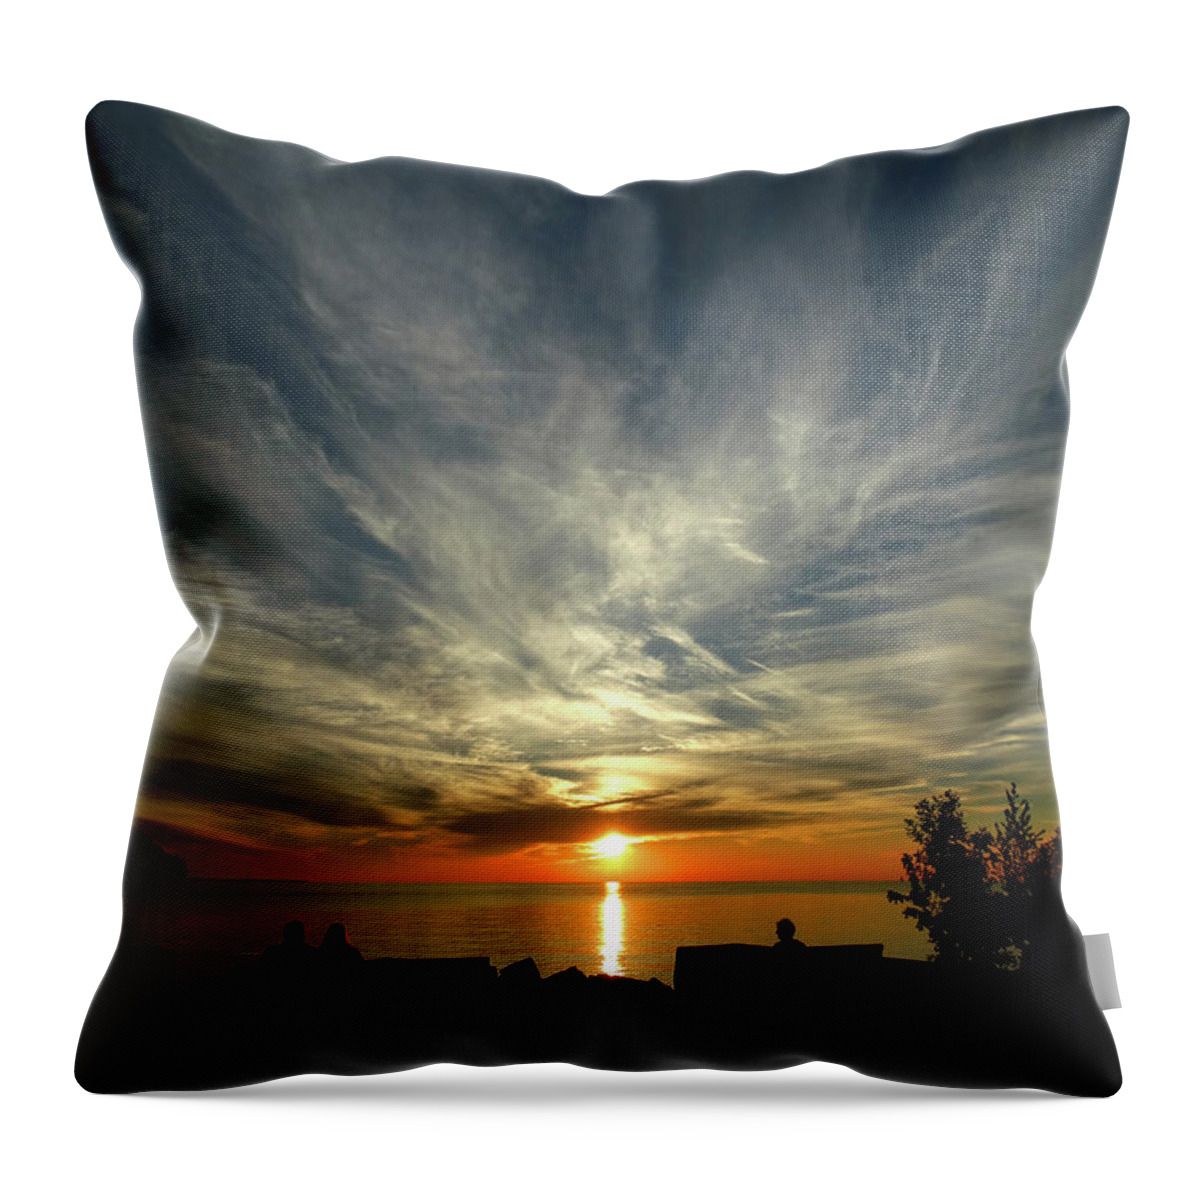 Sunset Throw Pillow featuring the photograph Sister Bay Sunset by David T Wilkinson